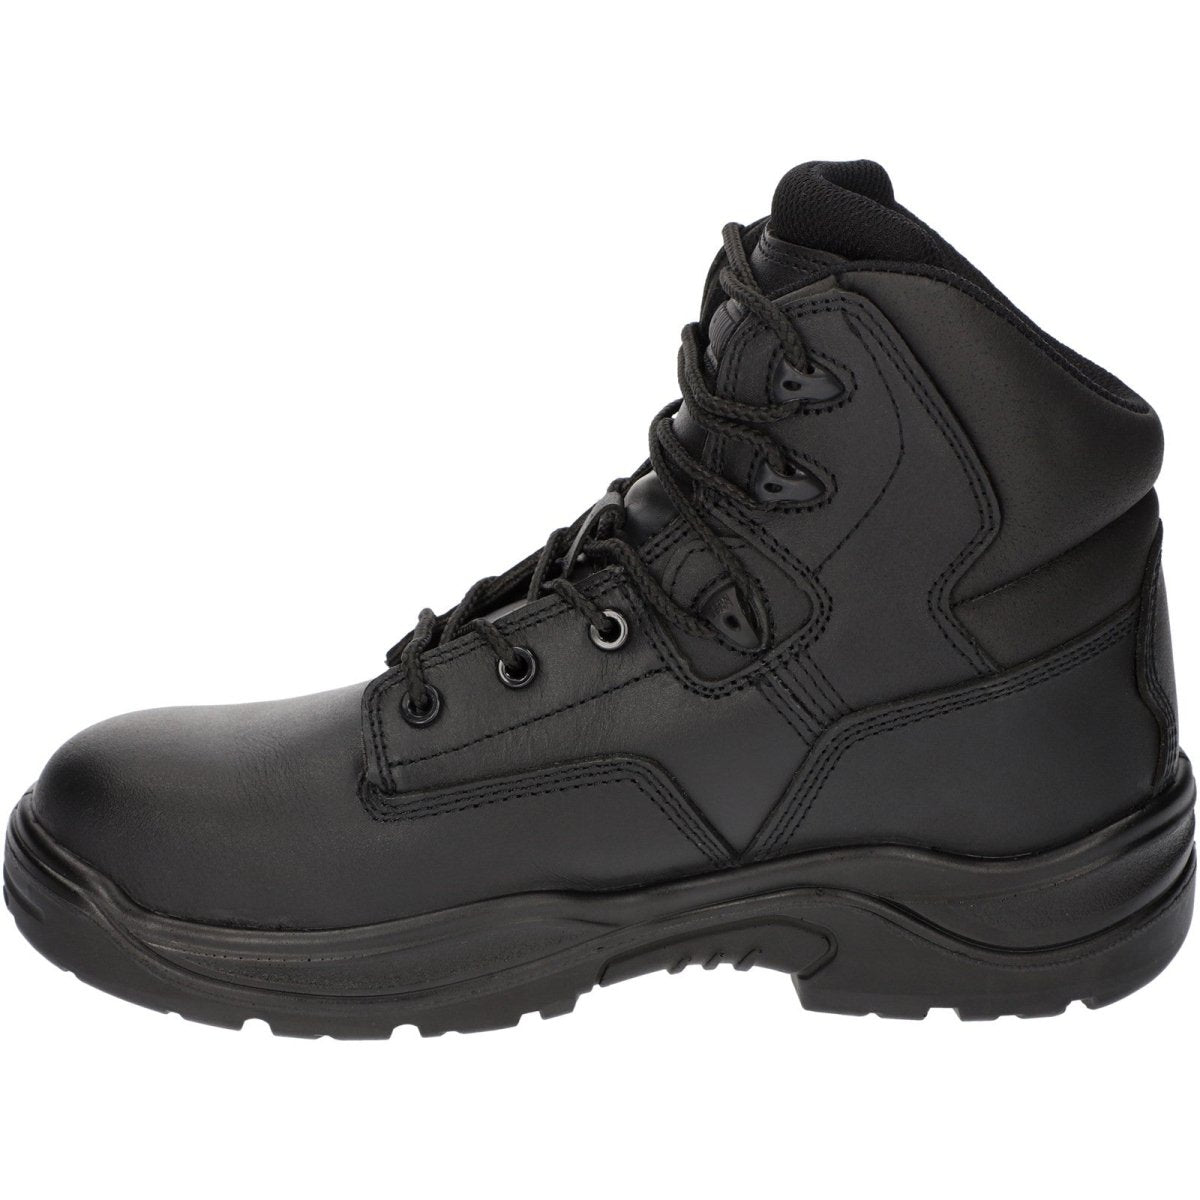 Magnum Precision Sitemaster S3 Waterproof Uniform Safety Boots - Shoe Store Direct